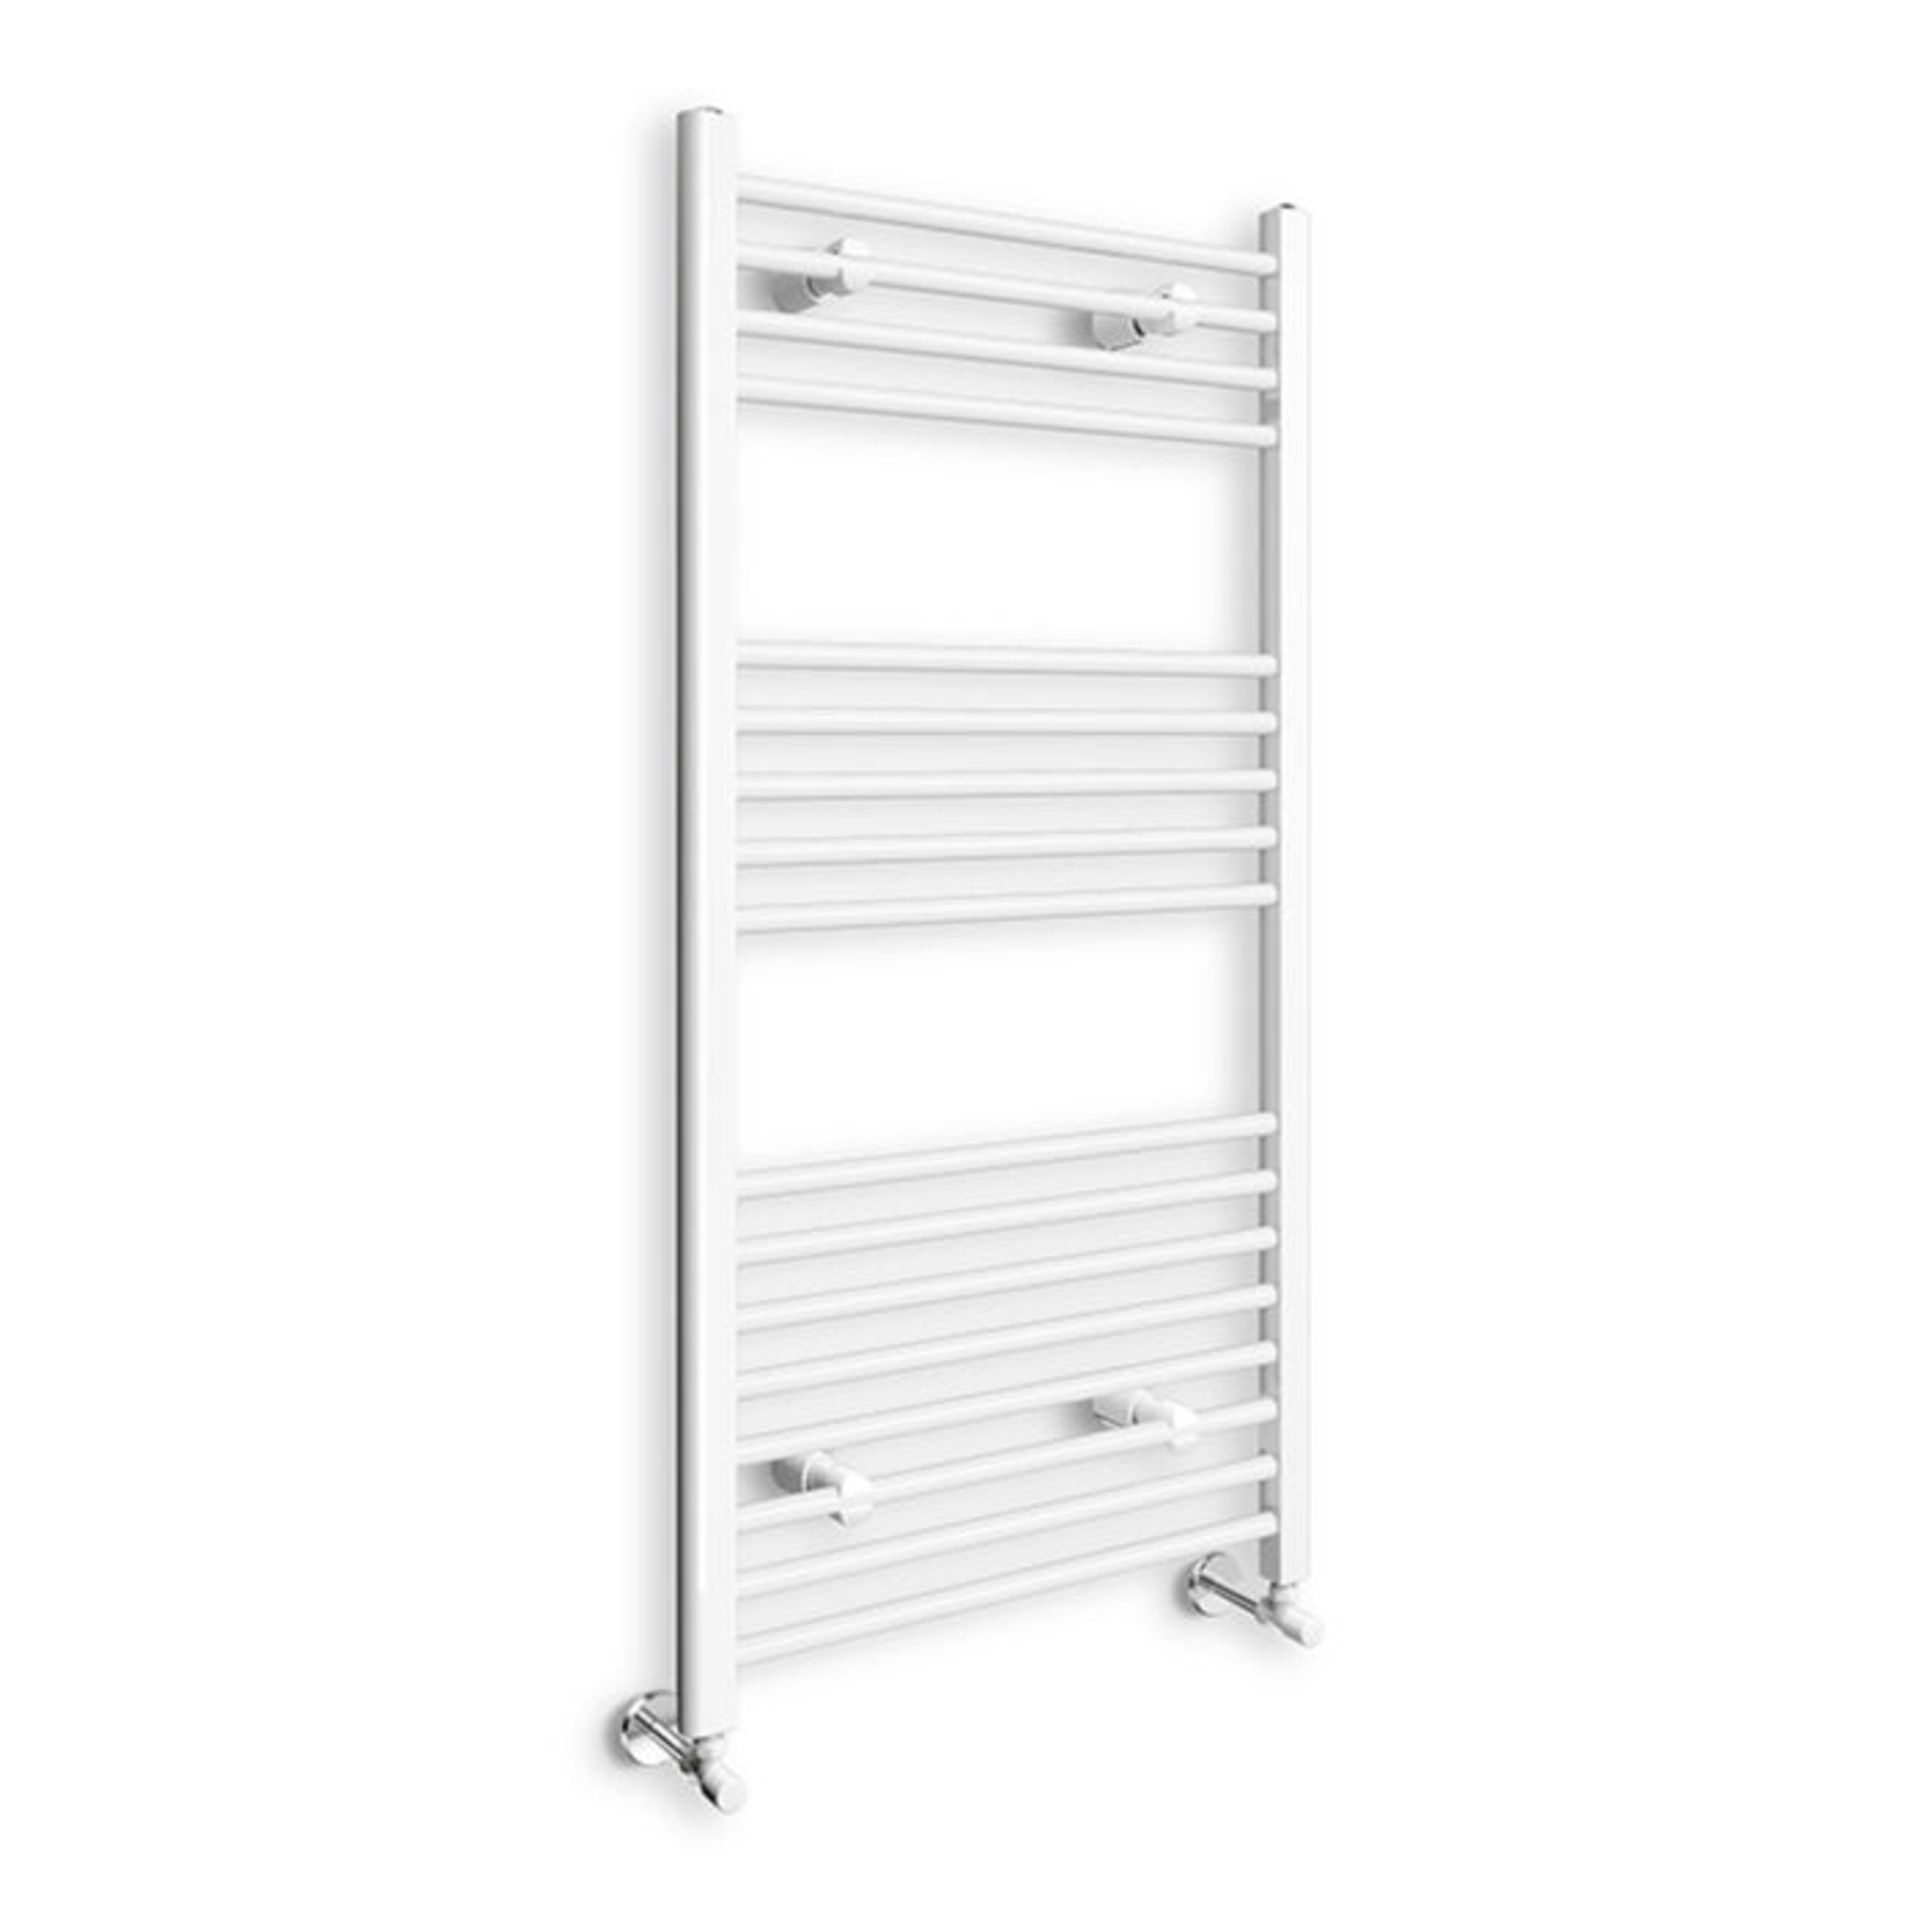 Brand New (HM58) 1200x600mm White Heated Towel Radiator. Made from low carbon steel Finished with a